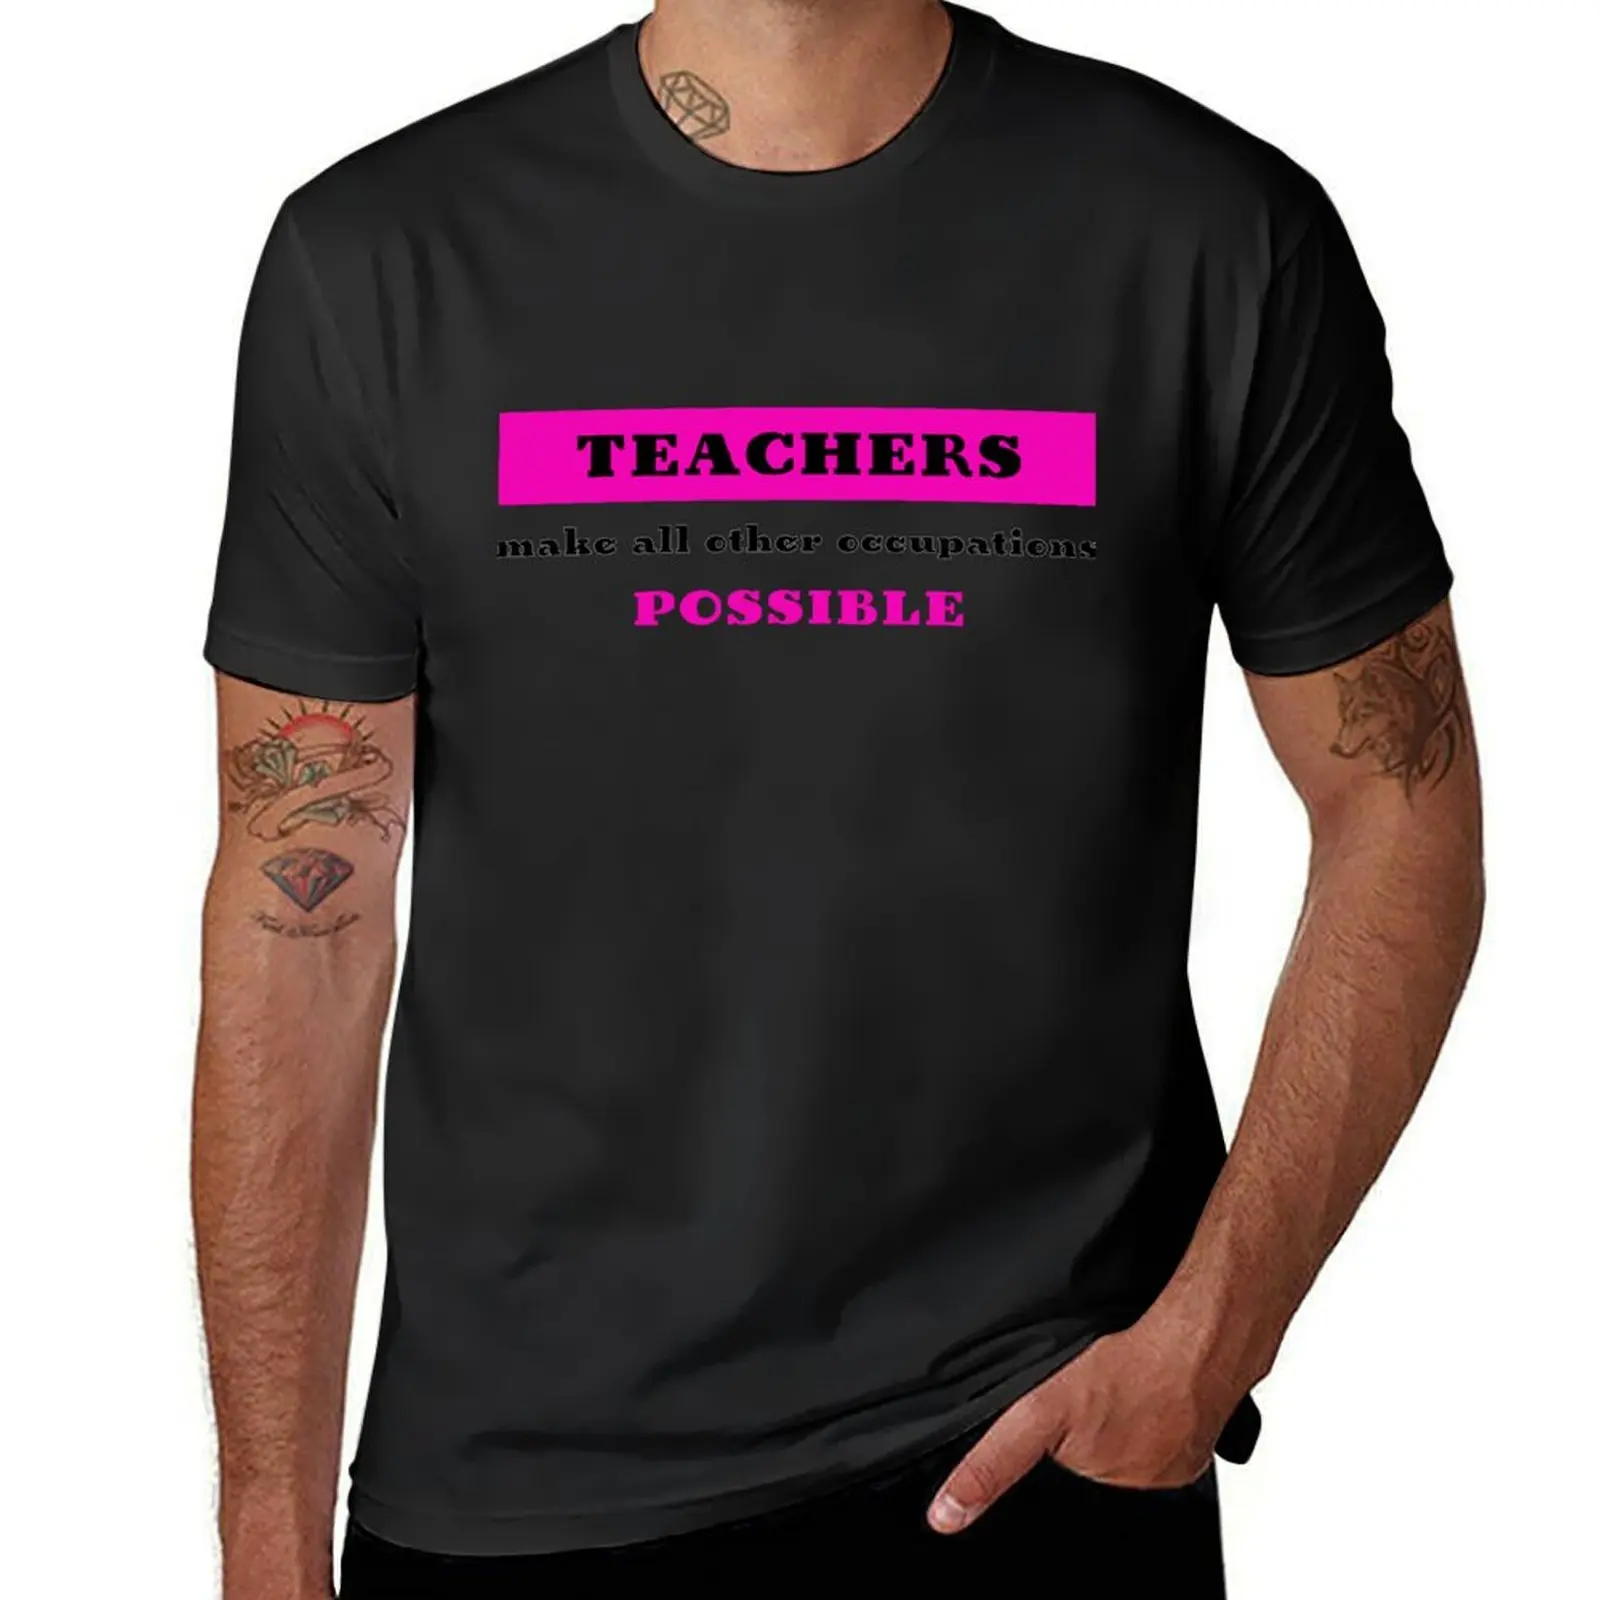 

Teachers make all other occupations possible Back to School Teacher T-Shirt tops customs workout shirts for men